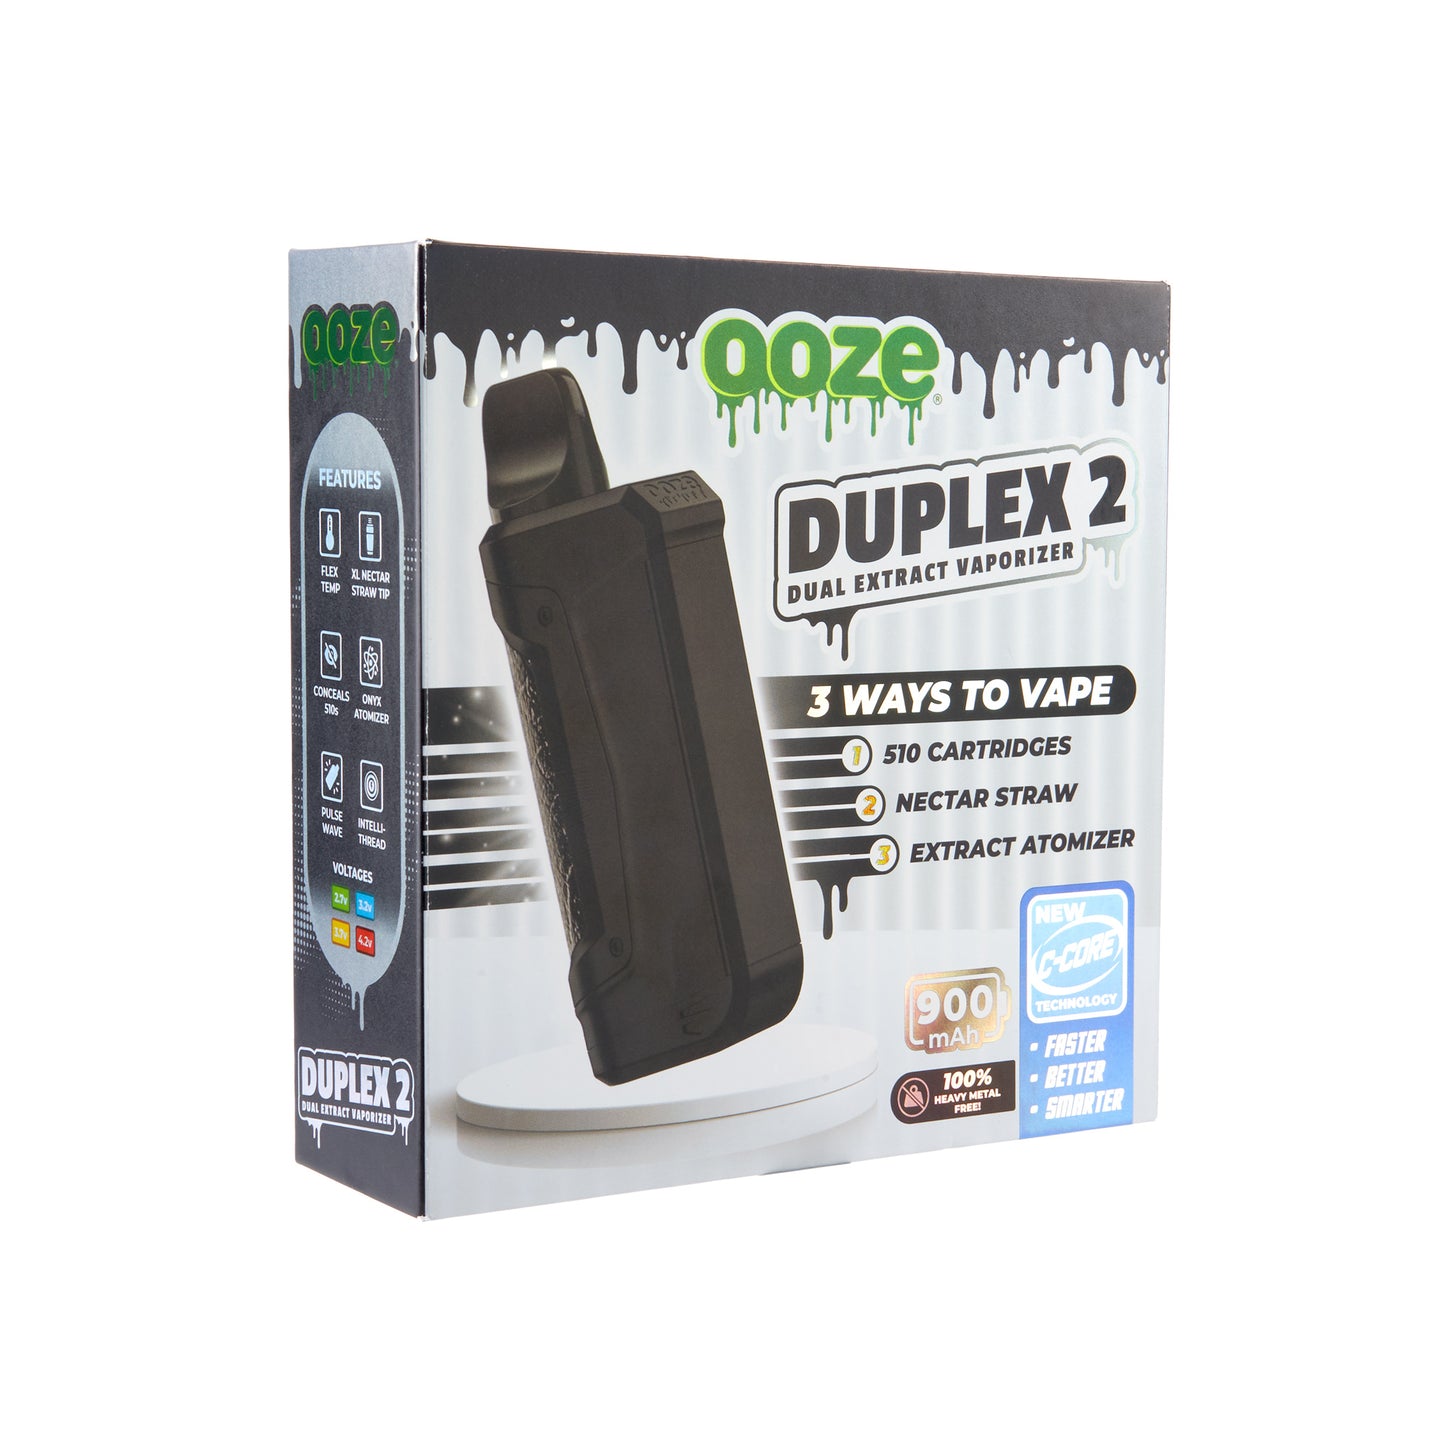 The box for The panther black Ooze Duplex 2 extract vaporizer